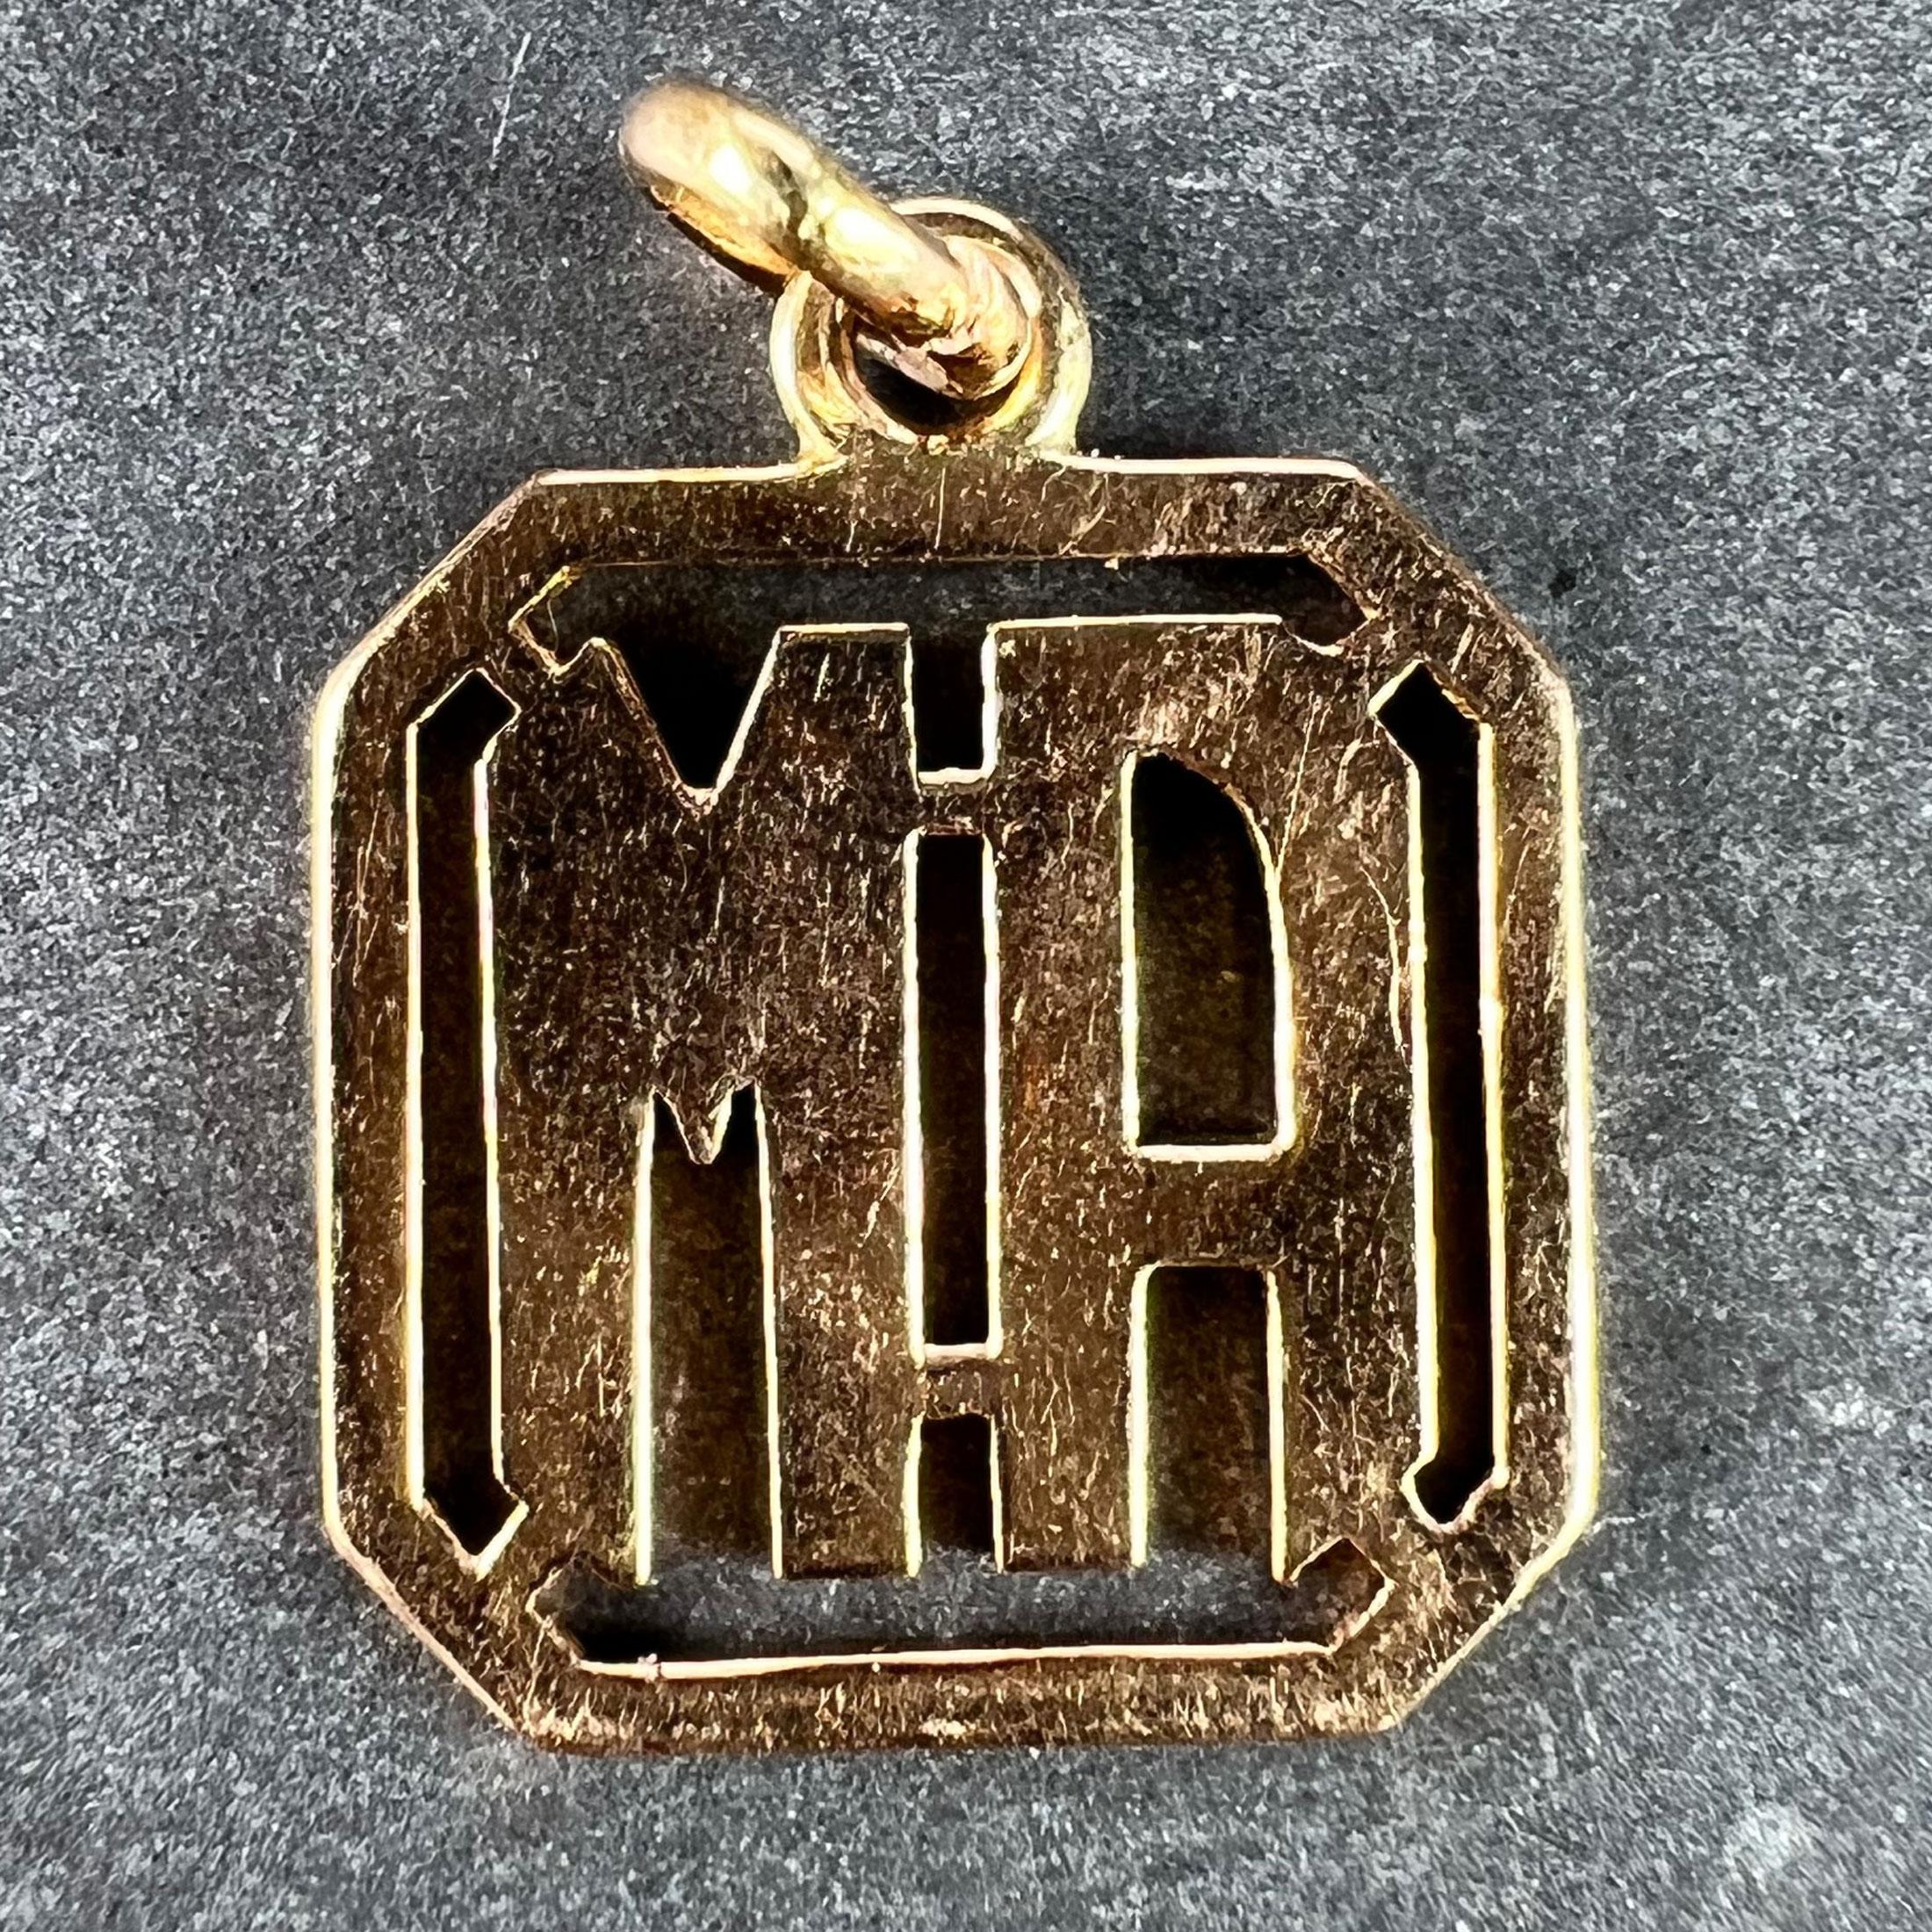 An 18 karat (18K) yellow gold charm pendant designed as a pierced square monogram of the initials MA or AM. Unmarked but tested for 18 karat gold.

Dimensions: 1.7 x 1.4 x 0.1 cm (not including jump ring)
Weight: 1.82 grams 
(Chain not included)